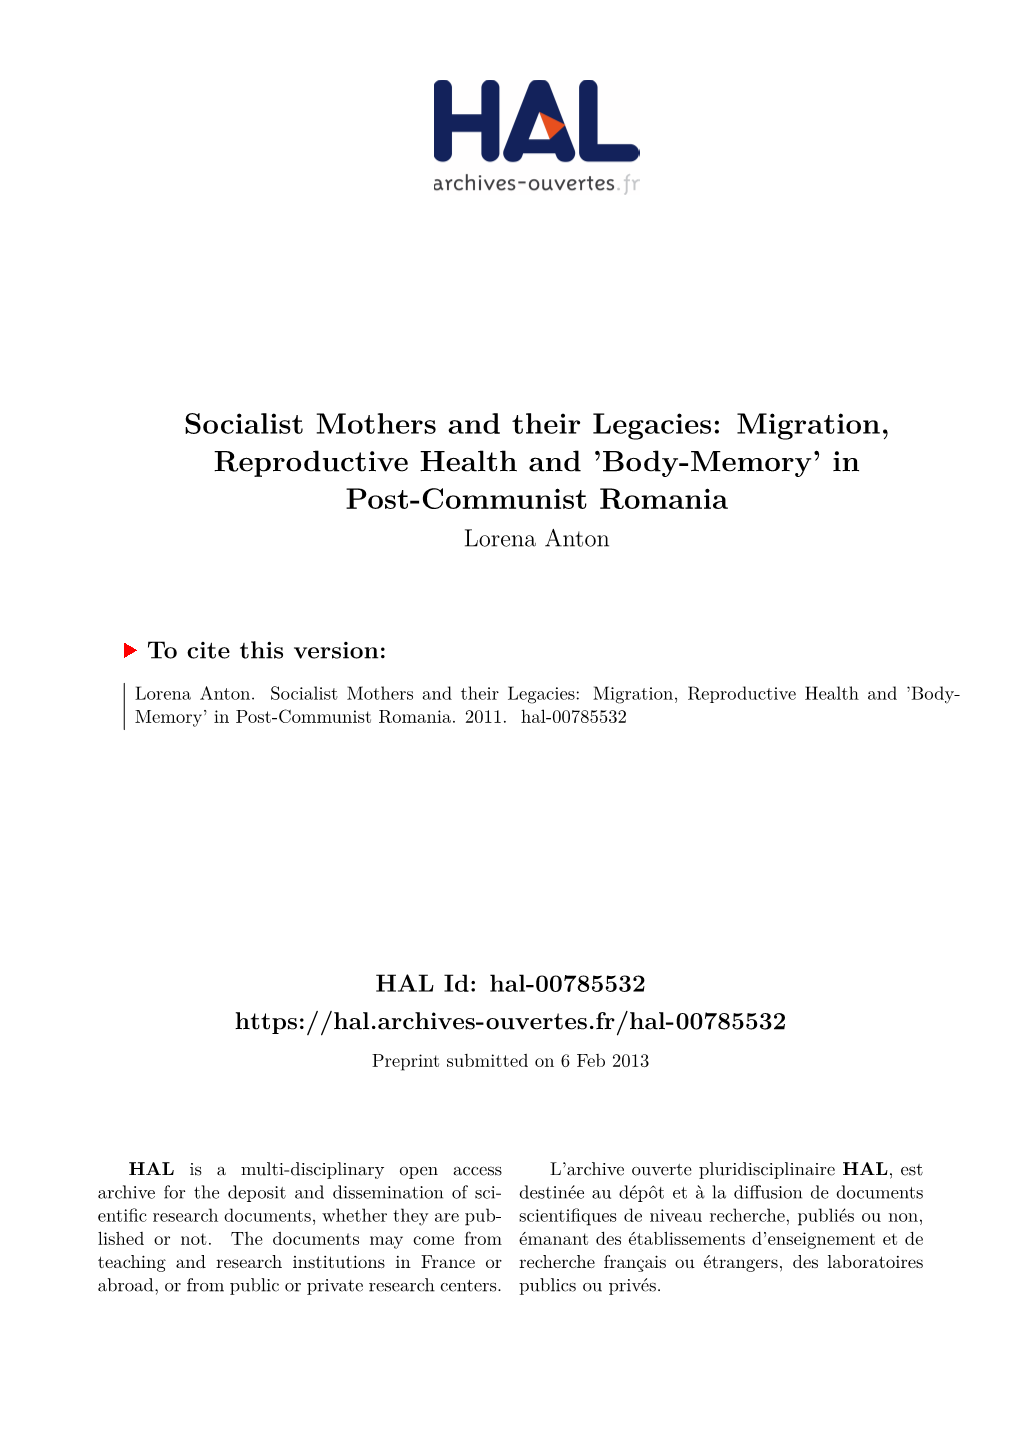 Socialist Mothers and Their Legacies: Migration, Reproductive Health and ’Body-Memory’ in Post-Communist Romania Lorena Anton